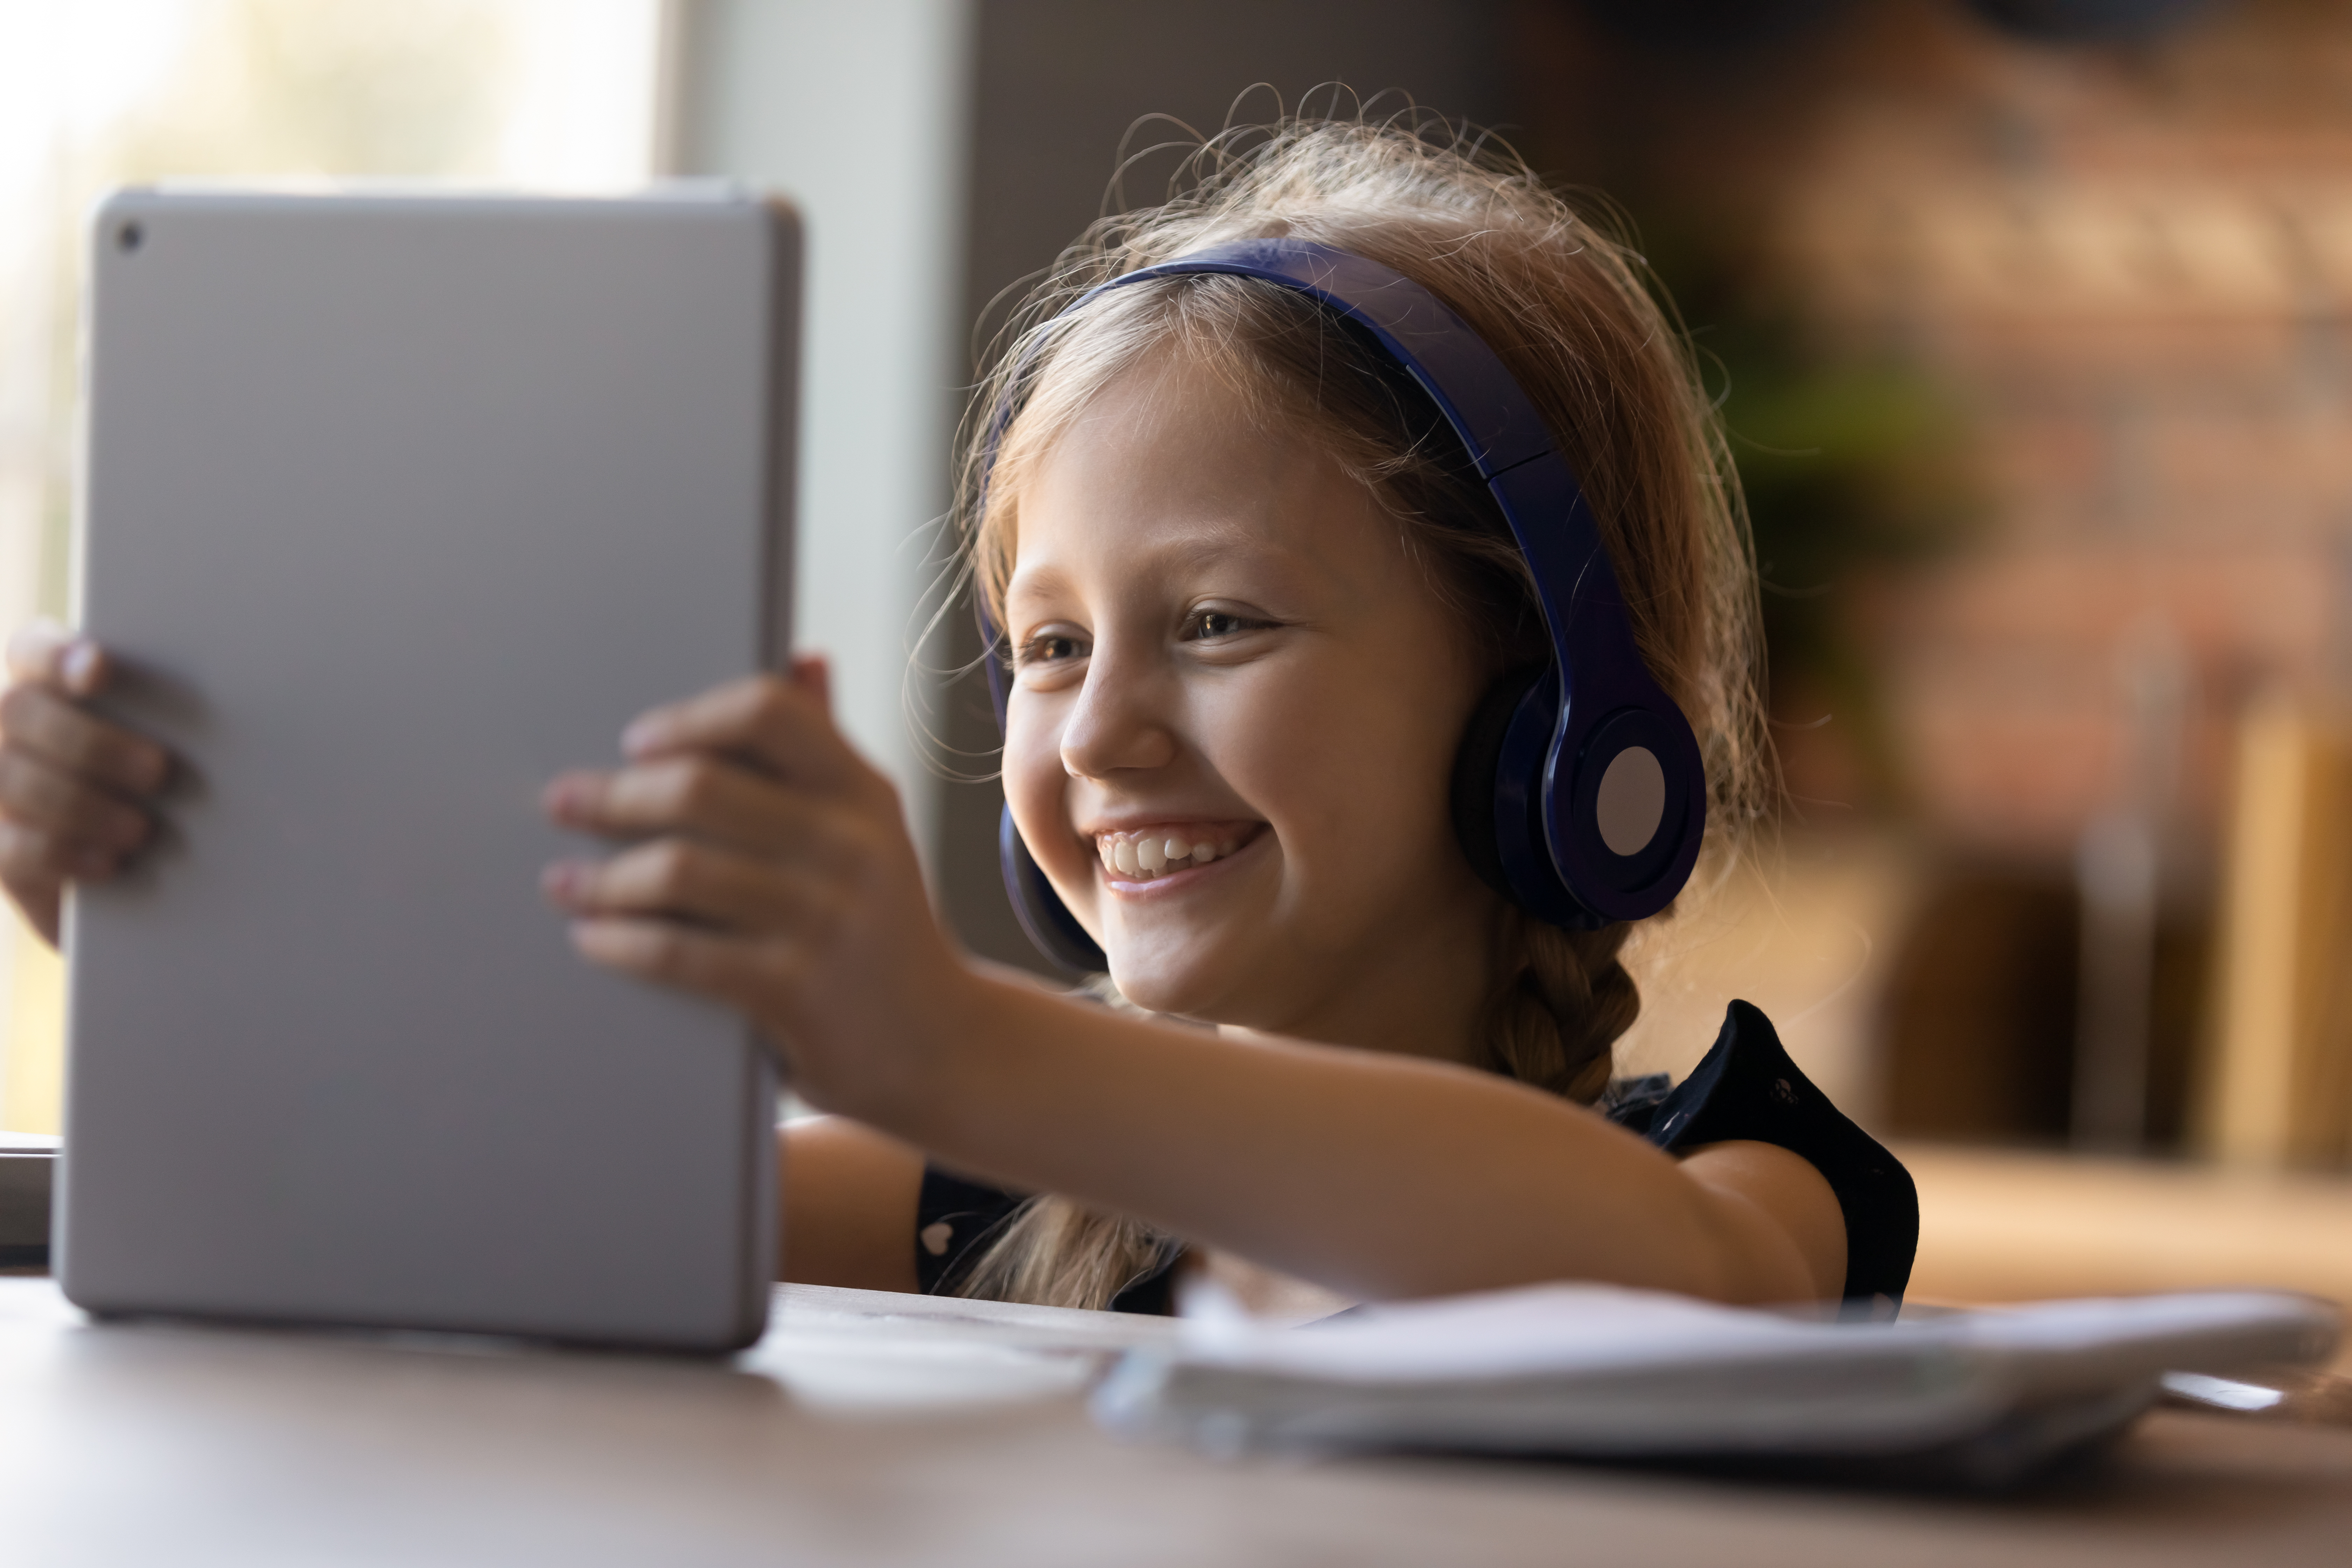 A child wearing headphones smiles as they use a tablet computer at a table